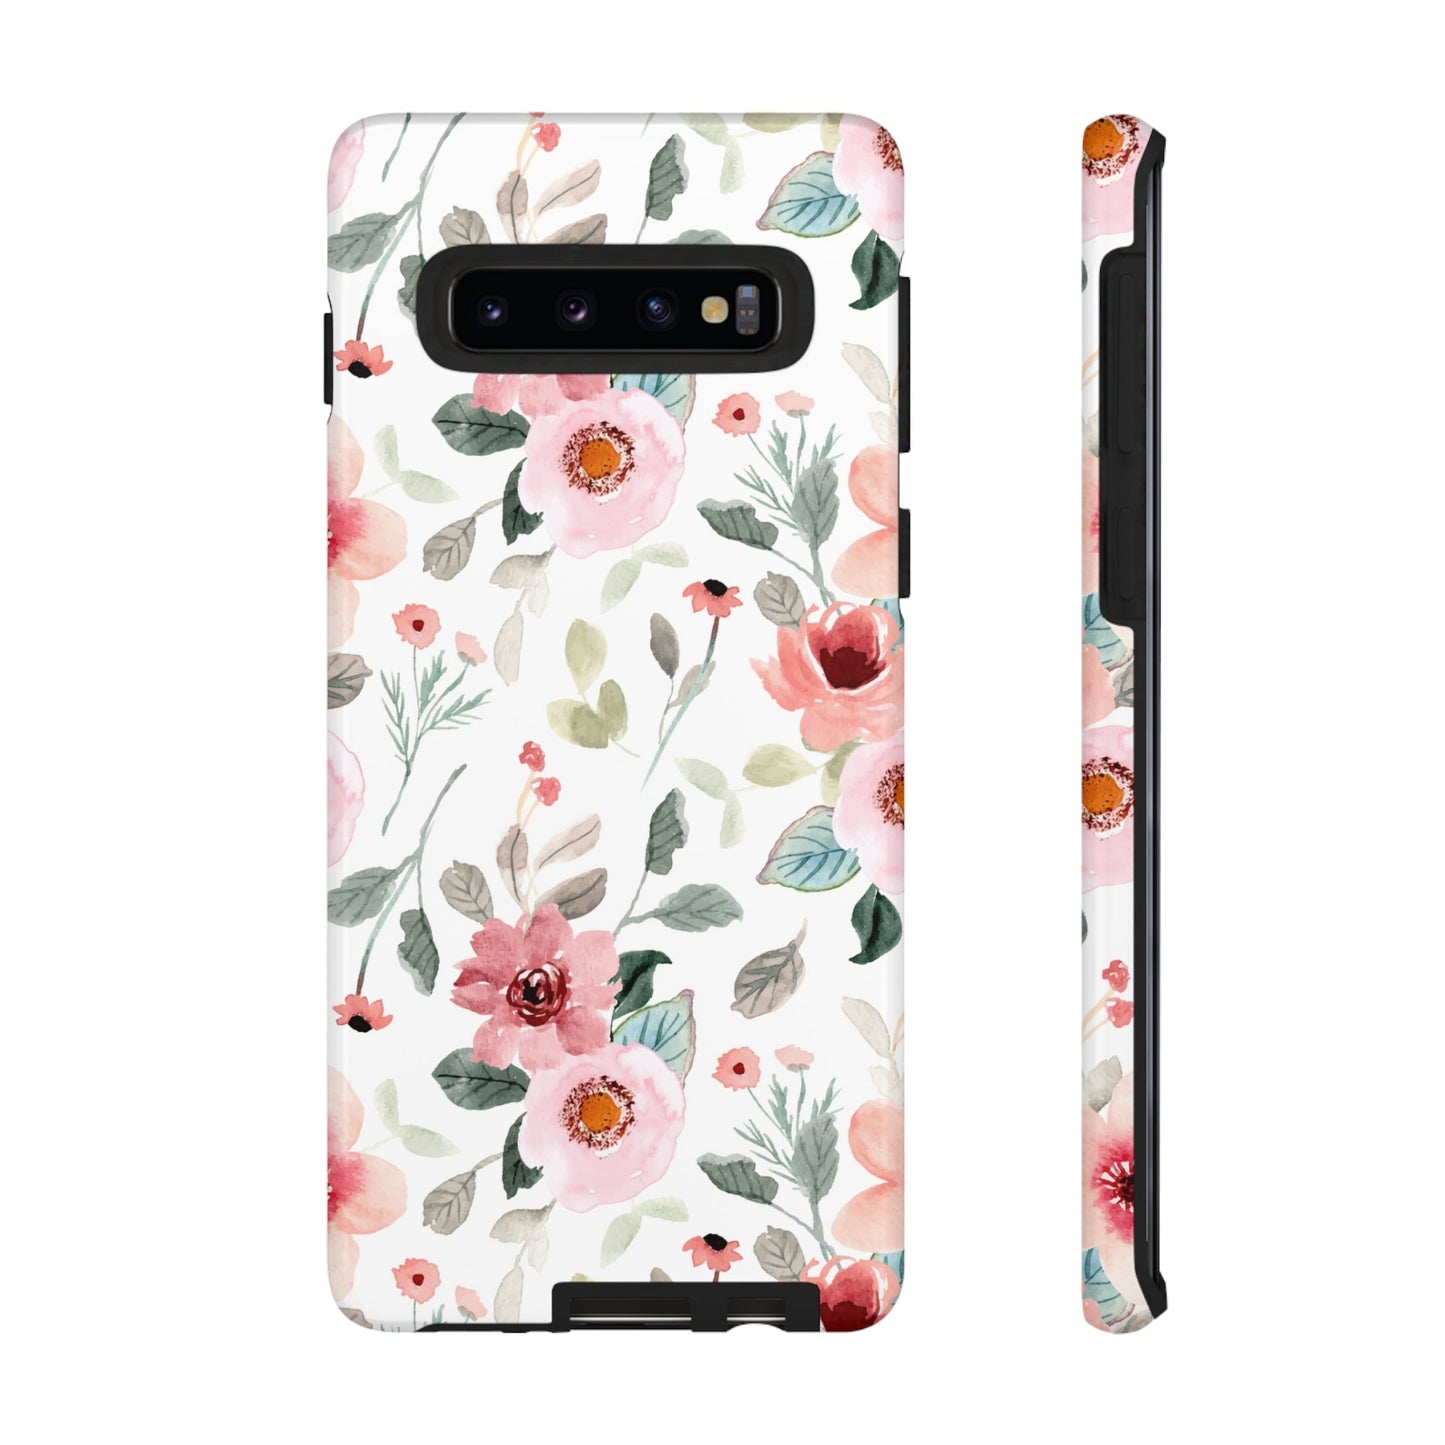 Load image into Gallery viewer, Phone case fits iPhone Samsung Galaxy Google Pixel- Pink Floral - Cheerful Lane
